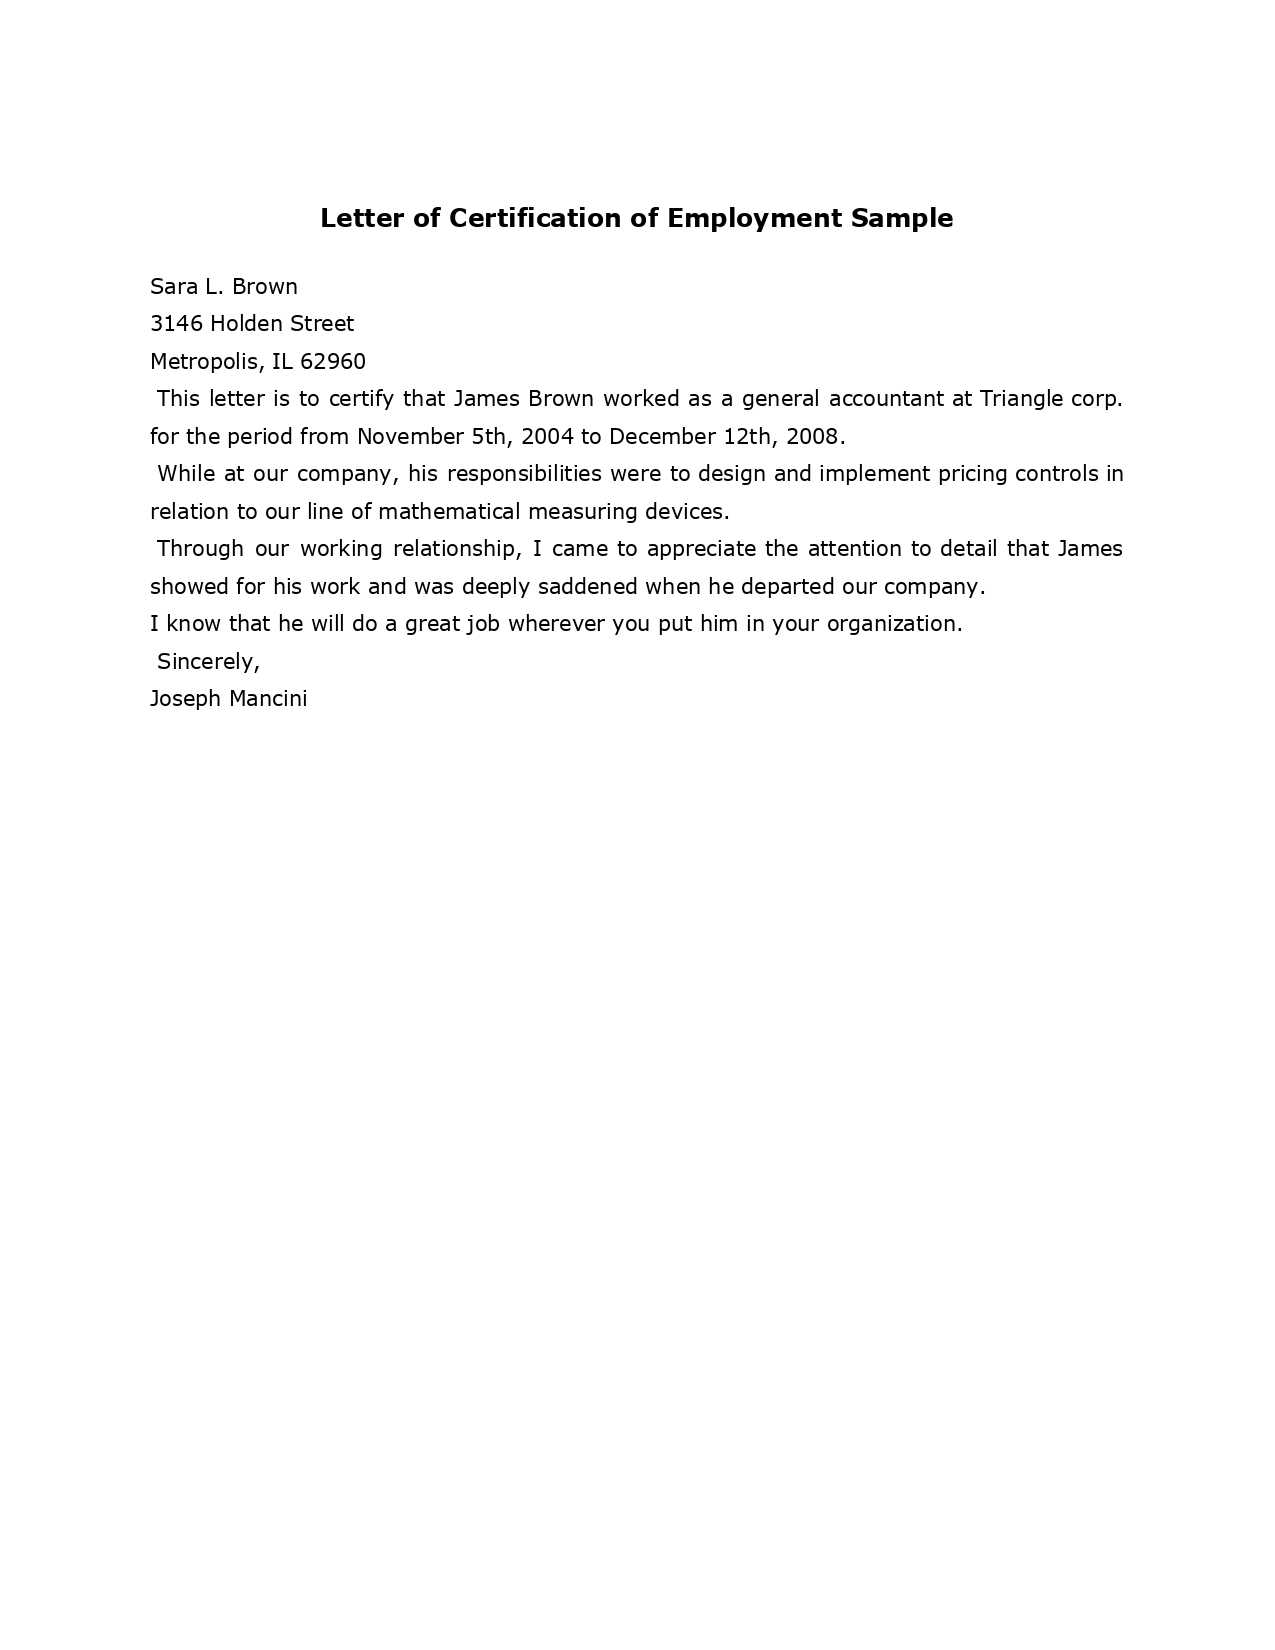 Sample Employment Certificate From Employer – Google Docs Inside Template Of Certificate Of Employment